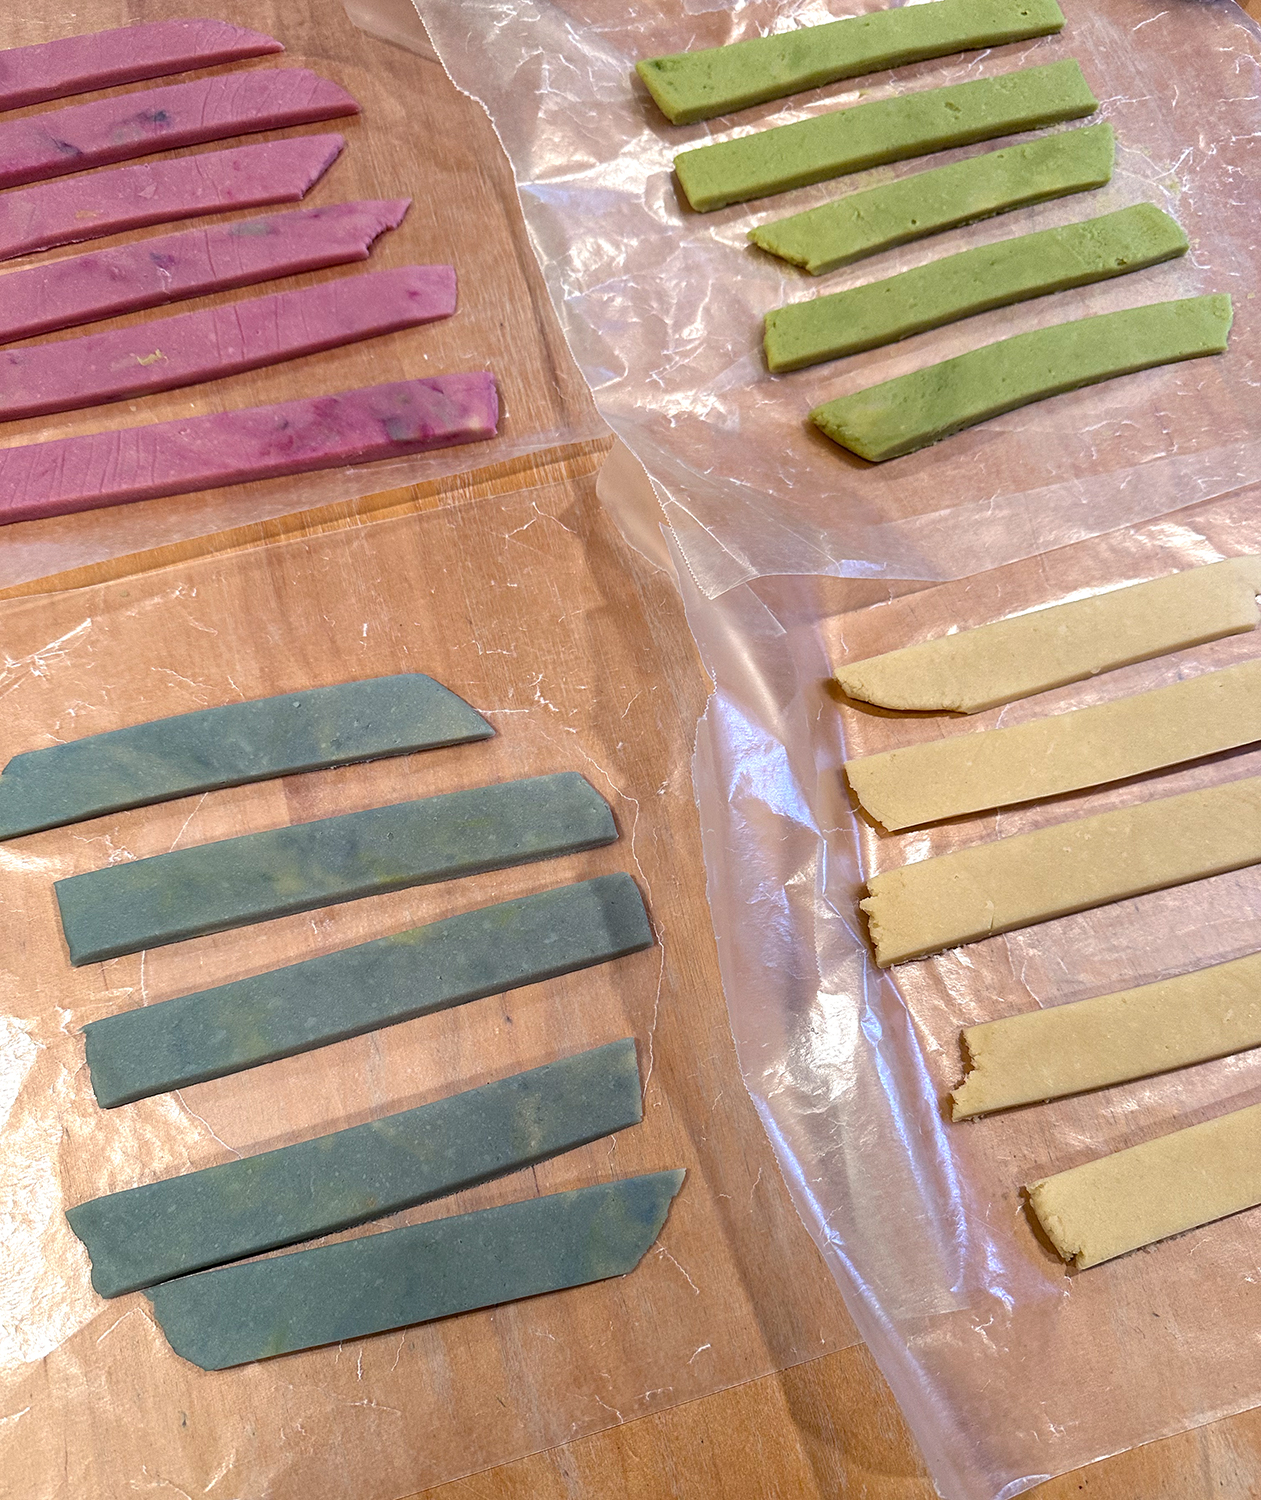 strips of colorful cookie dough